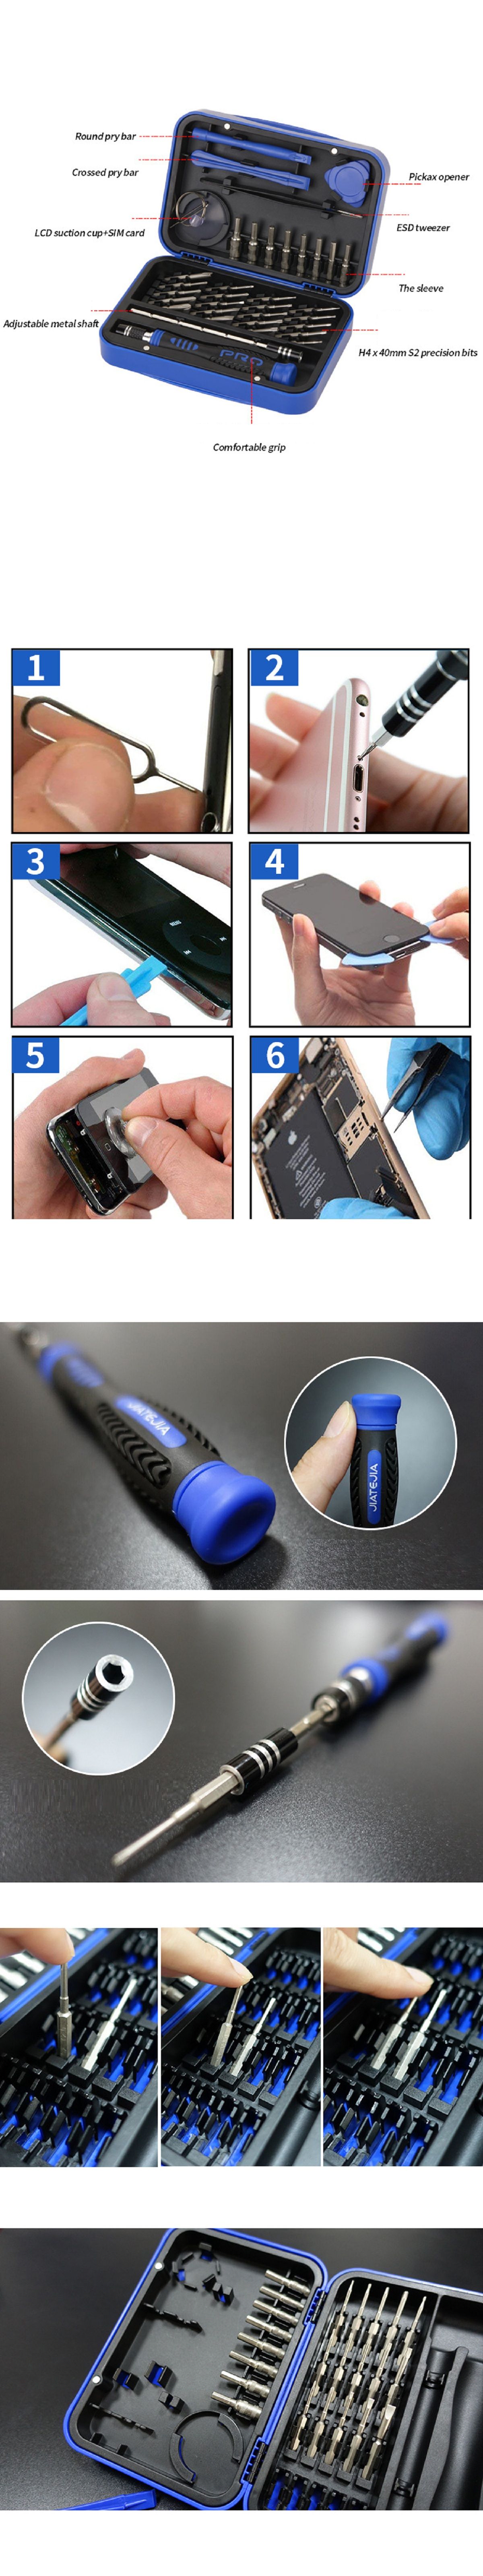 36-in-1-Multifunctional-S2-Screwdriver-Set-Stainless-Steel-Screwdriver-For-CameraMobile-PhoneCompute-1607971